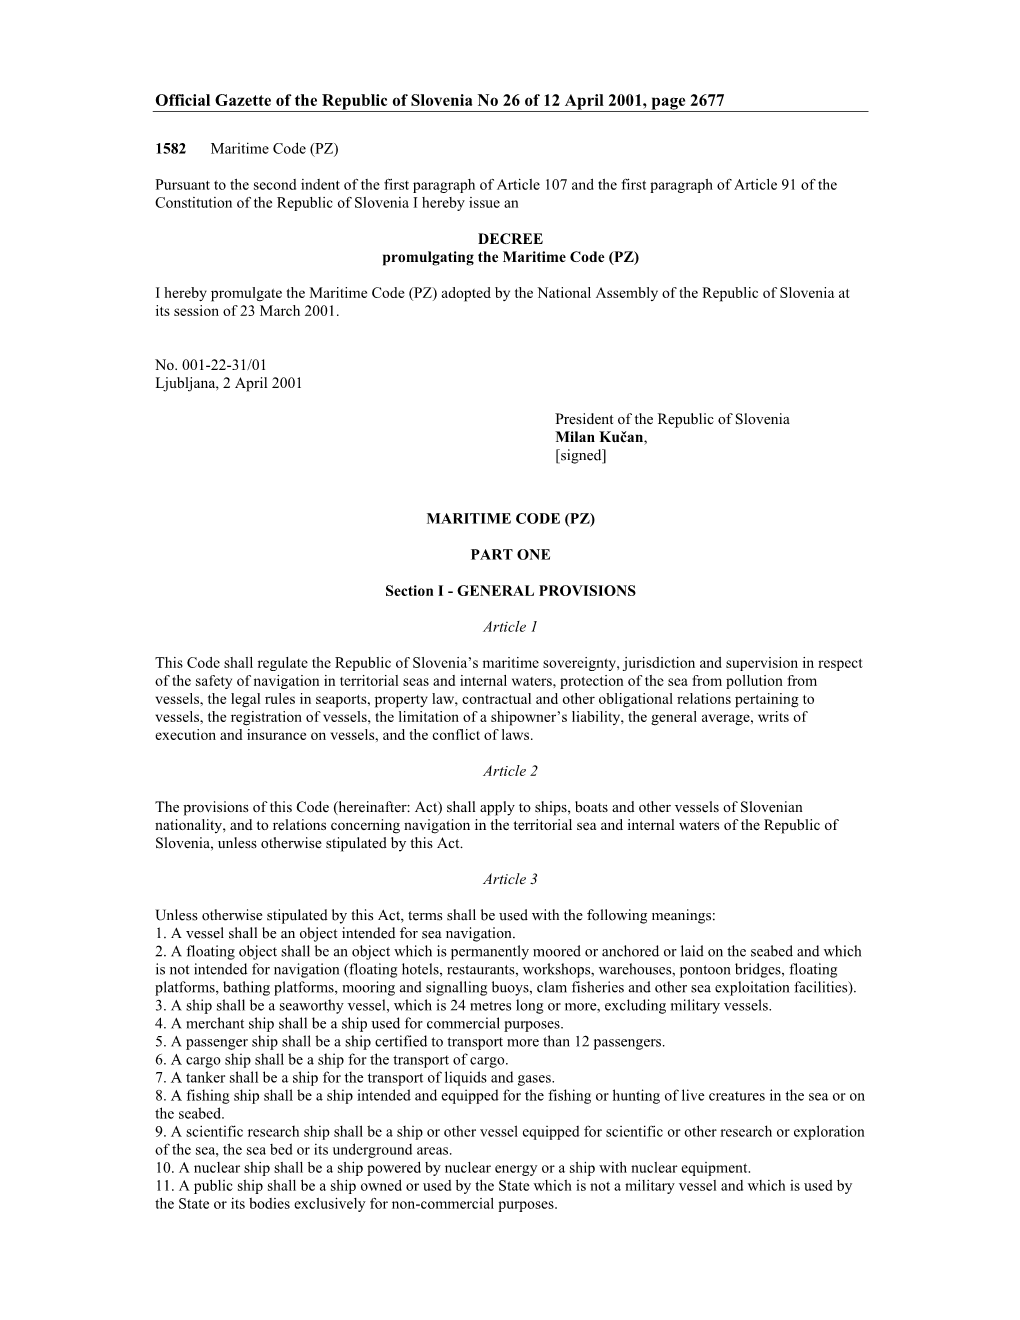 Official Gazette of the Republic of Slovenia No 26 of 12 April 2001, Page 2677